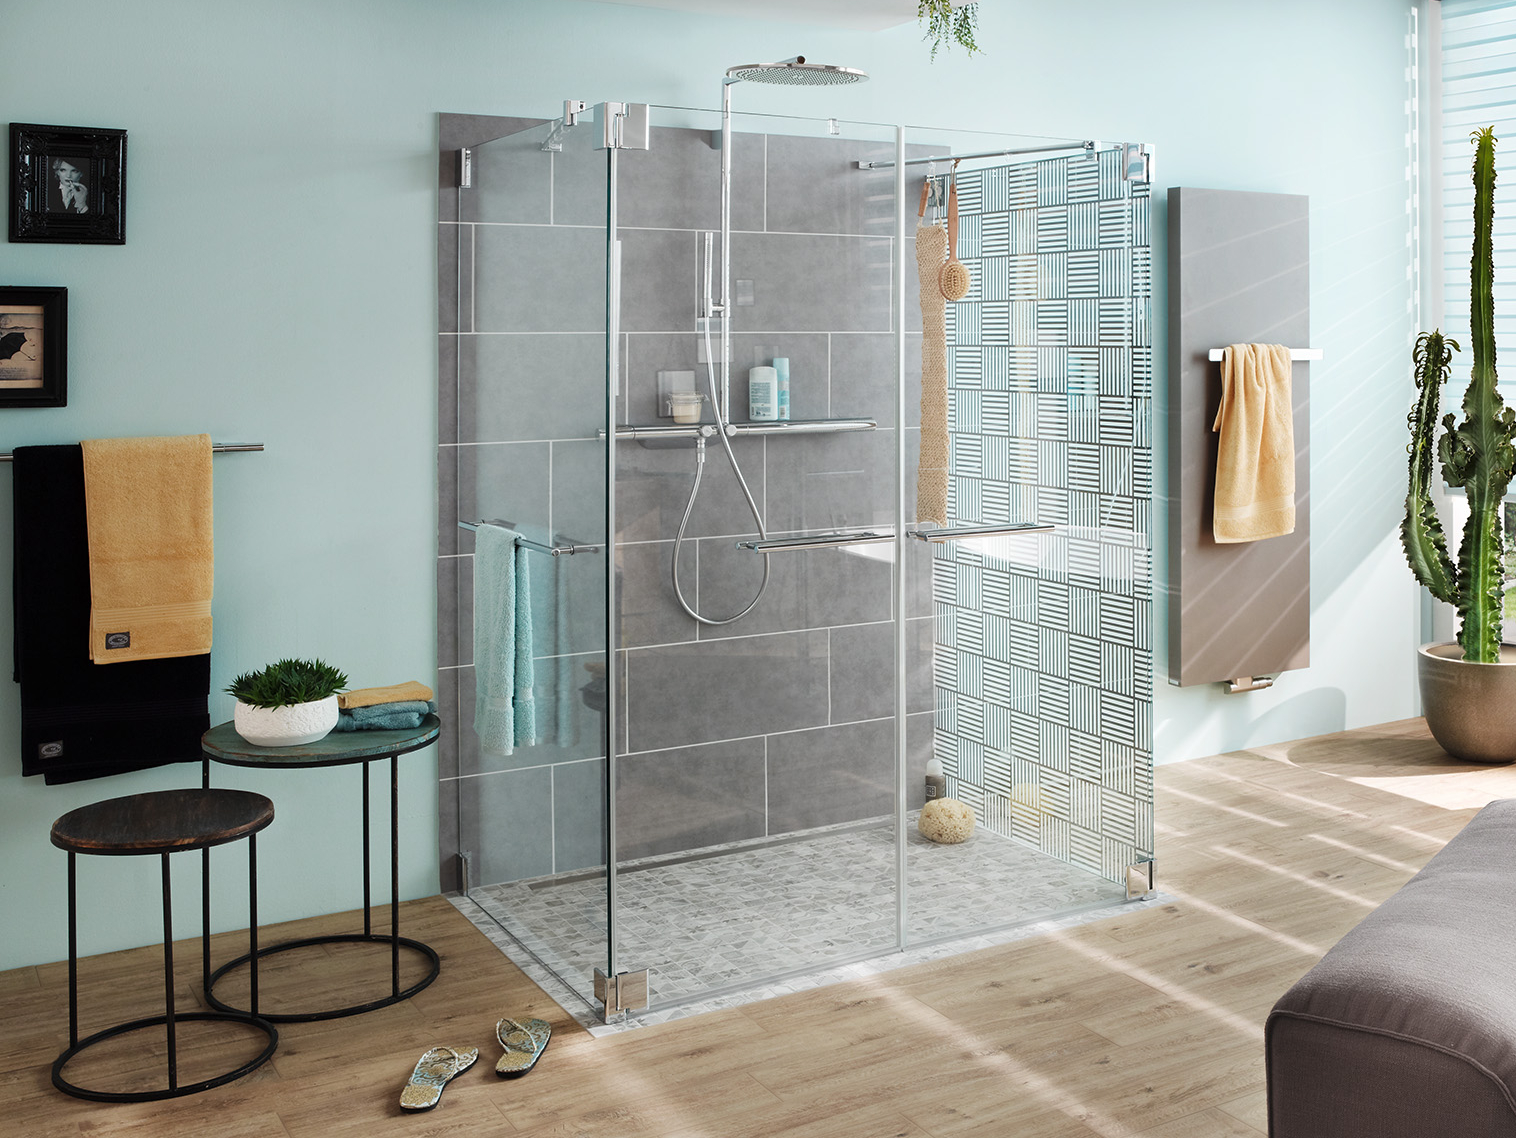 Kermi shower board LINE with channel cover along wall